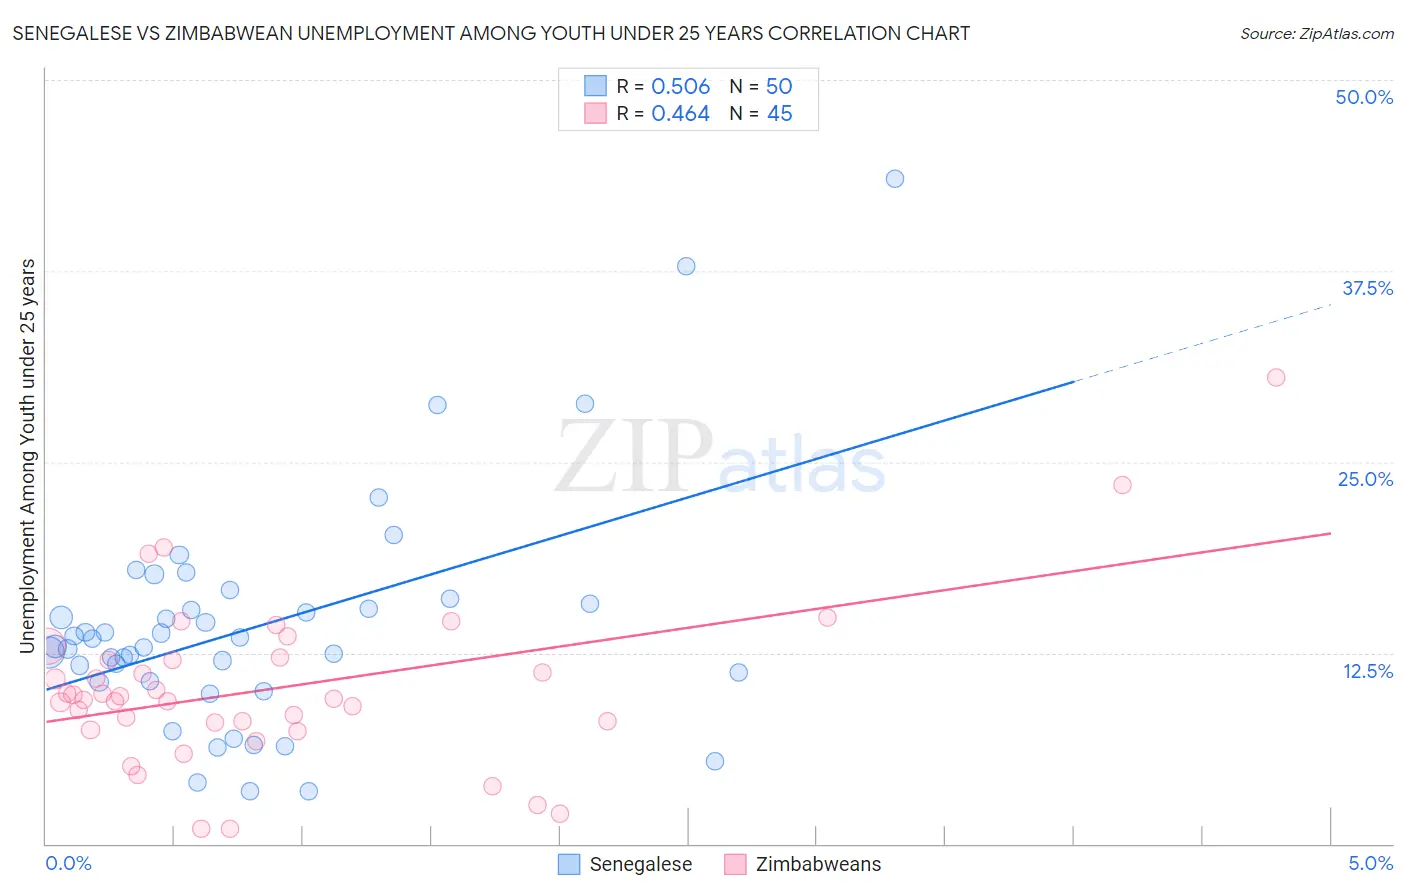 Senegalese vs Zimbabwean Unemployment Among Youth under 25 years